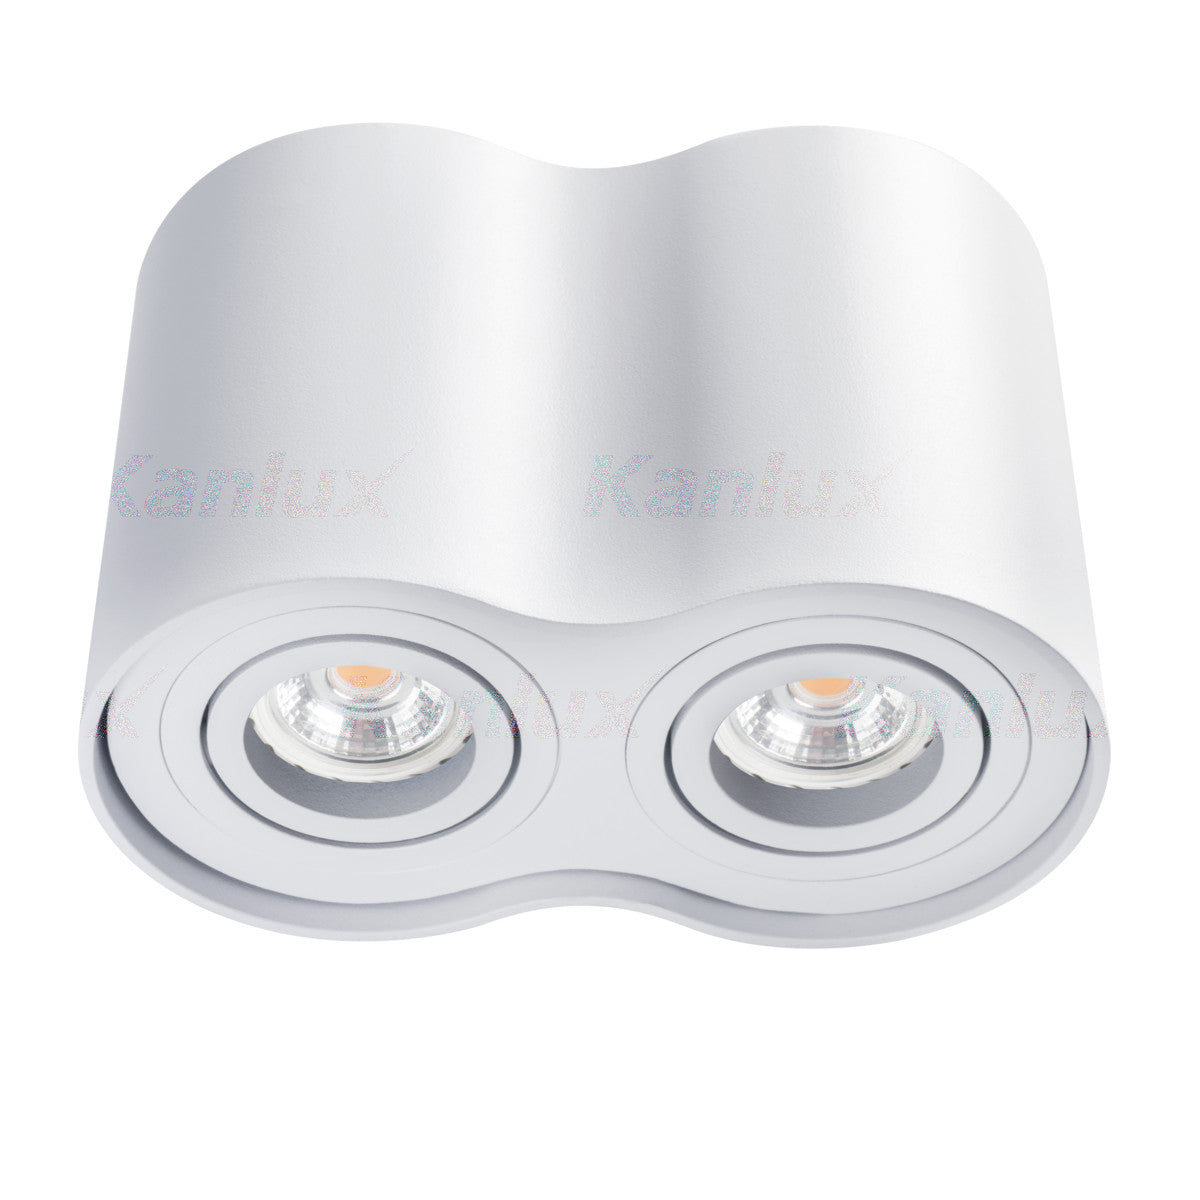 Kanlux BORD Single, Twin Surface Ceiling Mounted GU10 Light Fitting